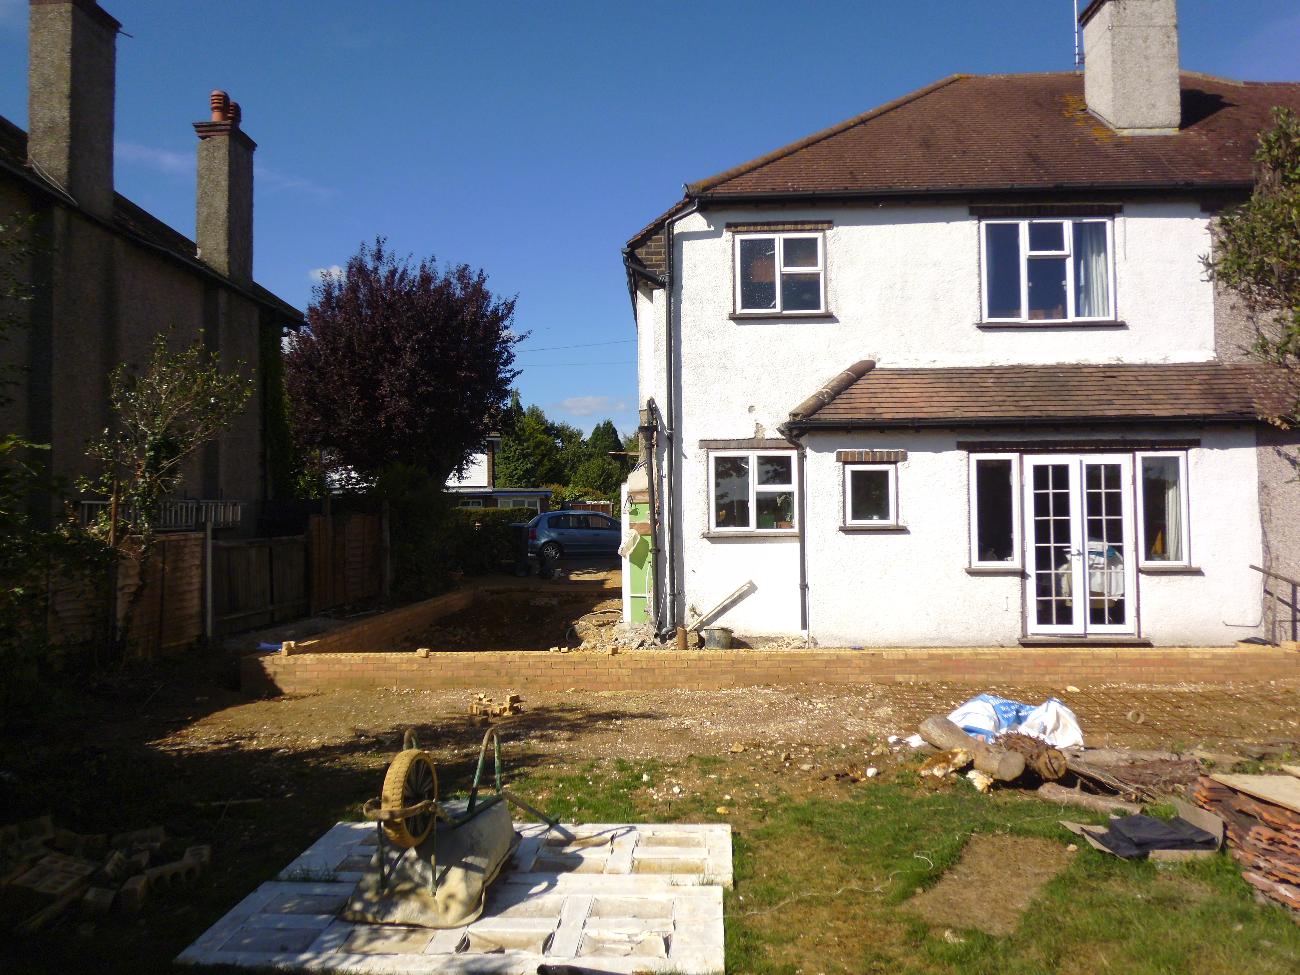 Building projects in the South East| Maclen Property Services gallery image 4